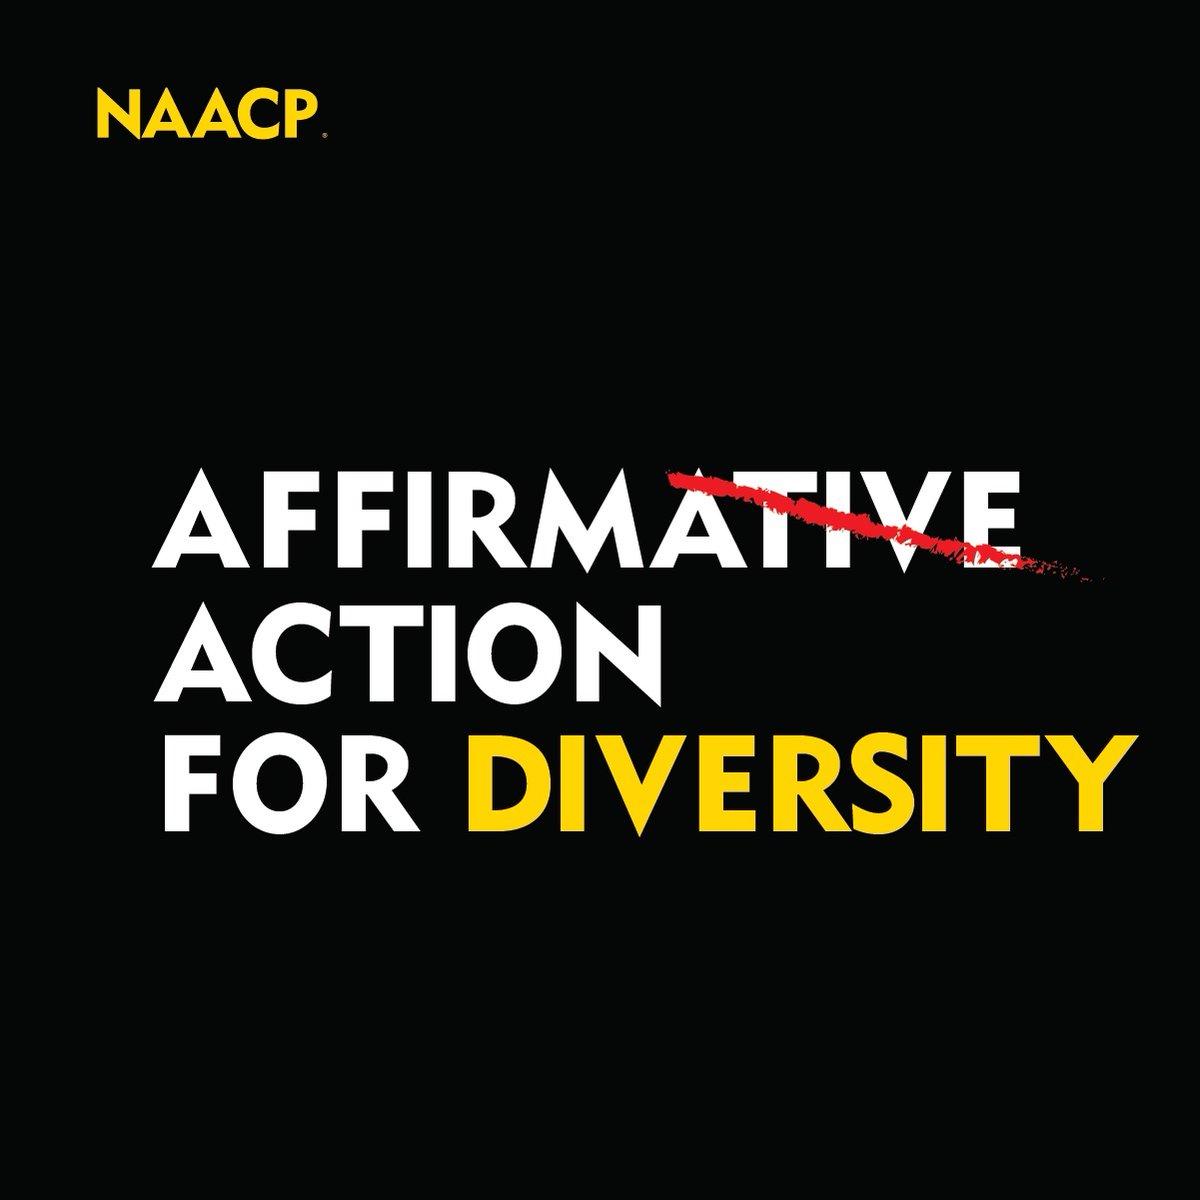 'In a society still scarred by the wounds of racial disparities, the Supreme Court has displayed a willful ignorance of our reality.' —@DerrickNAACP Today's decision on affirmative action jeopardizes hard-fought progress for Black Americans. Read more: bit.ly/3NzS8mu